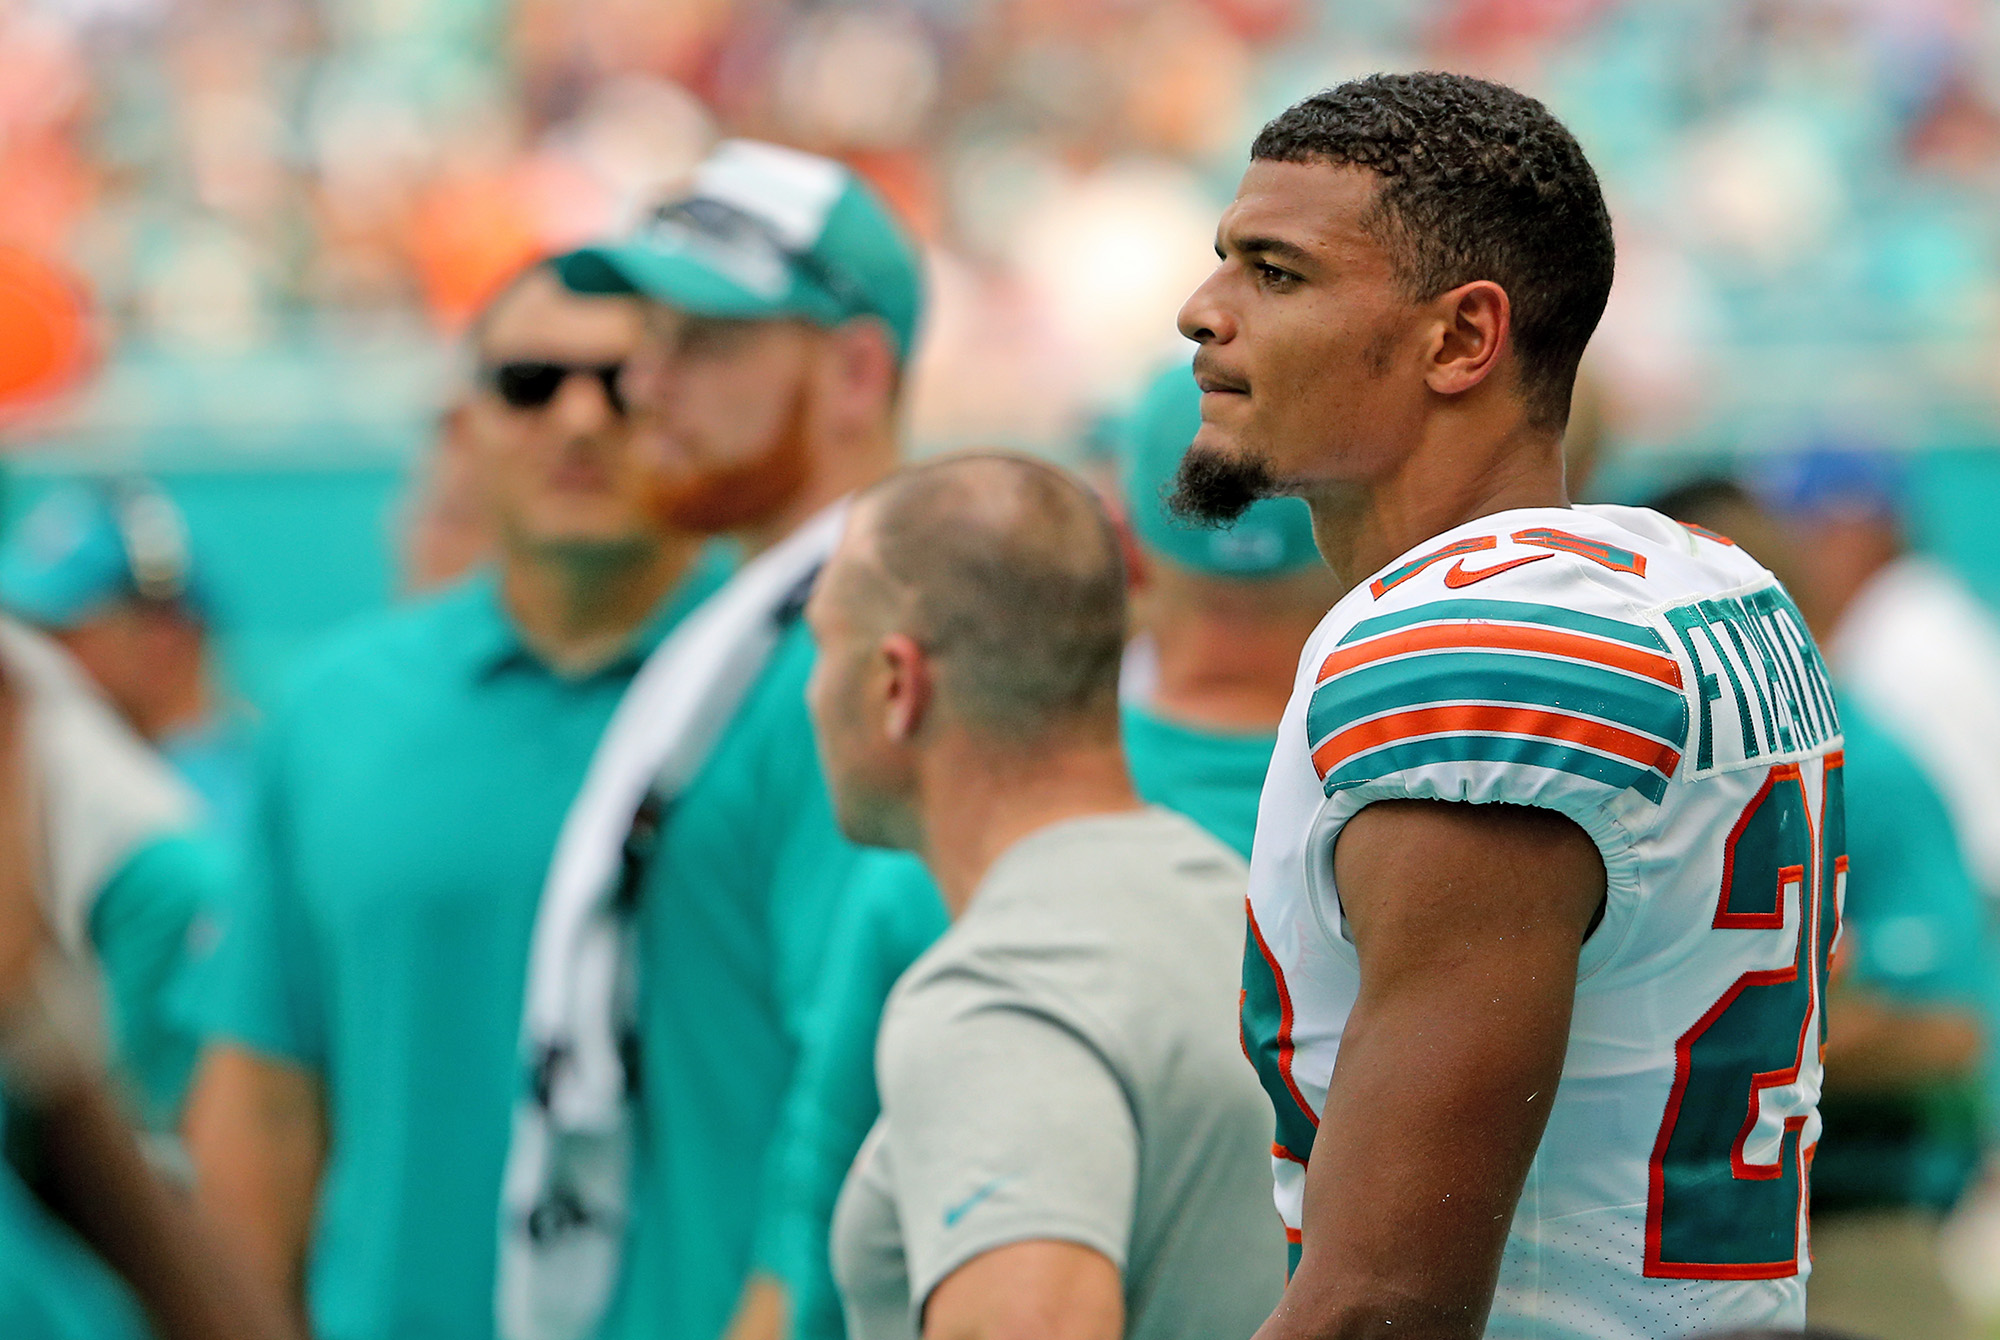 Minkah Fitzpatrick stands on the sideline during a Dolphins game